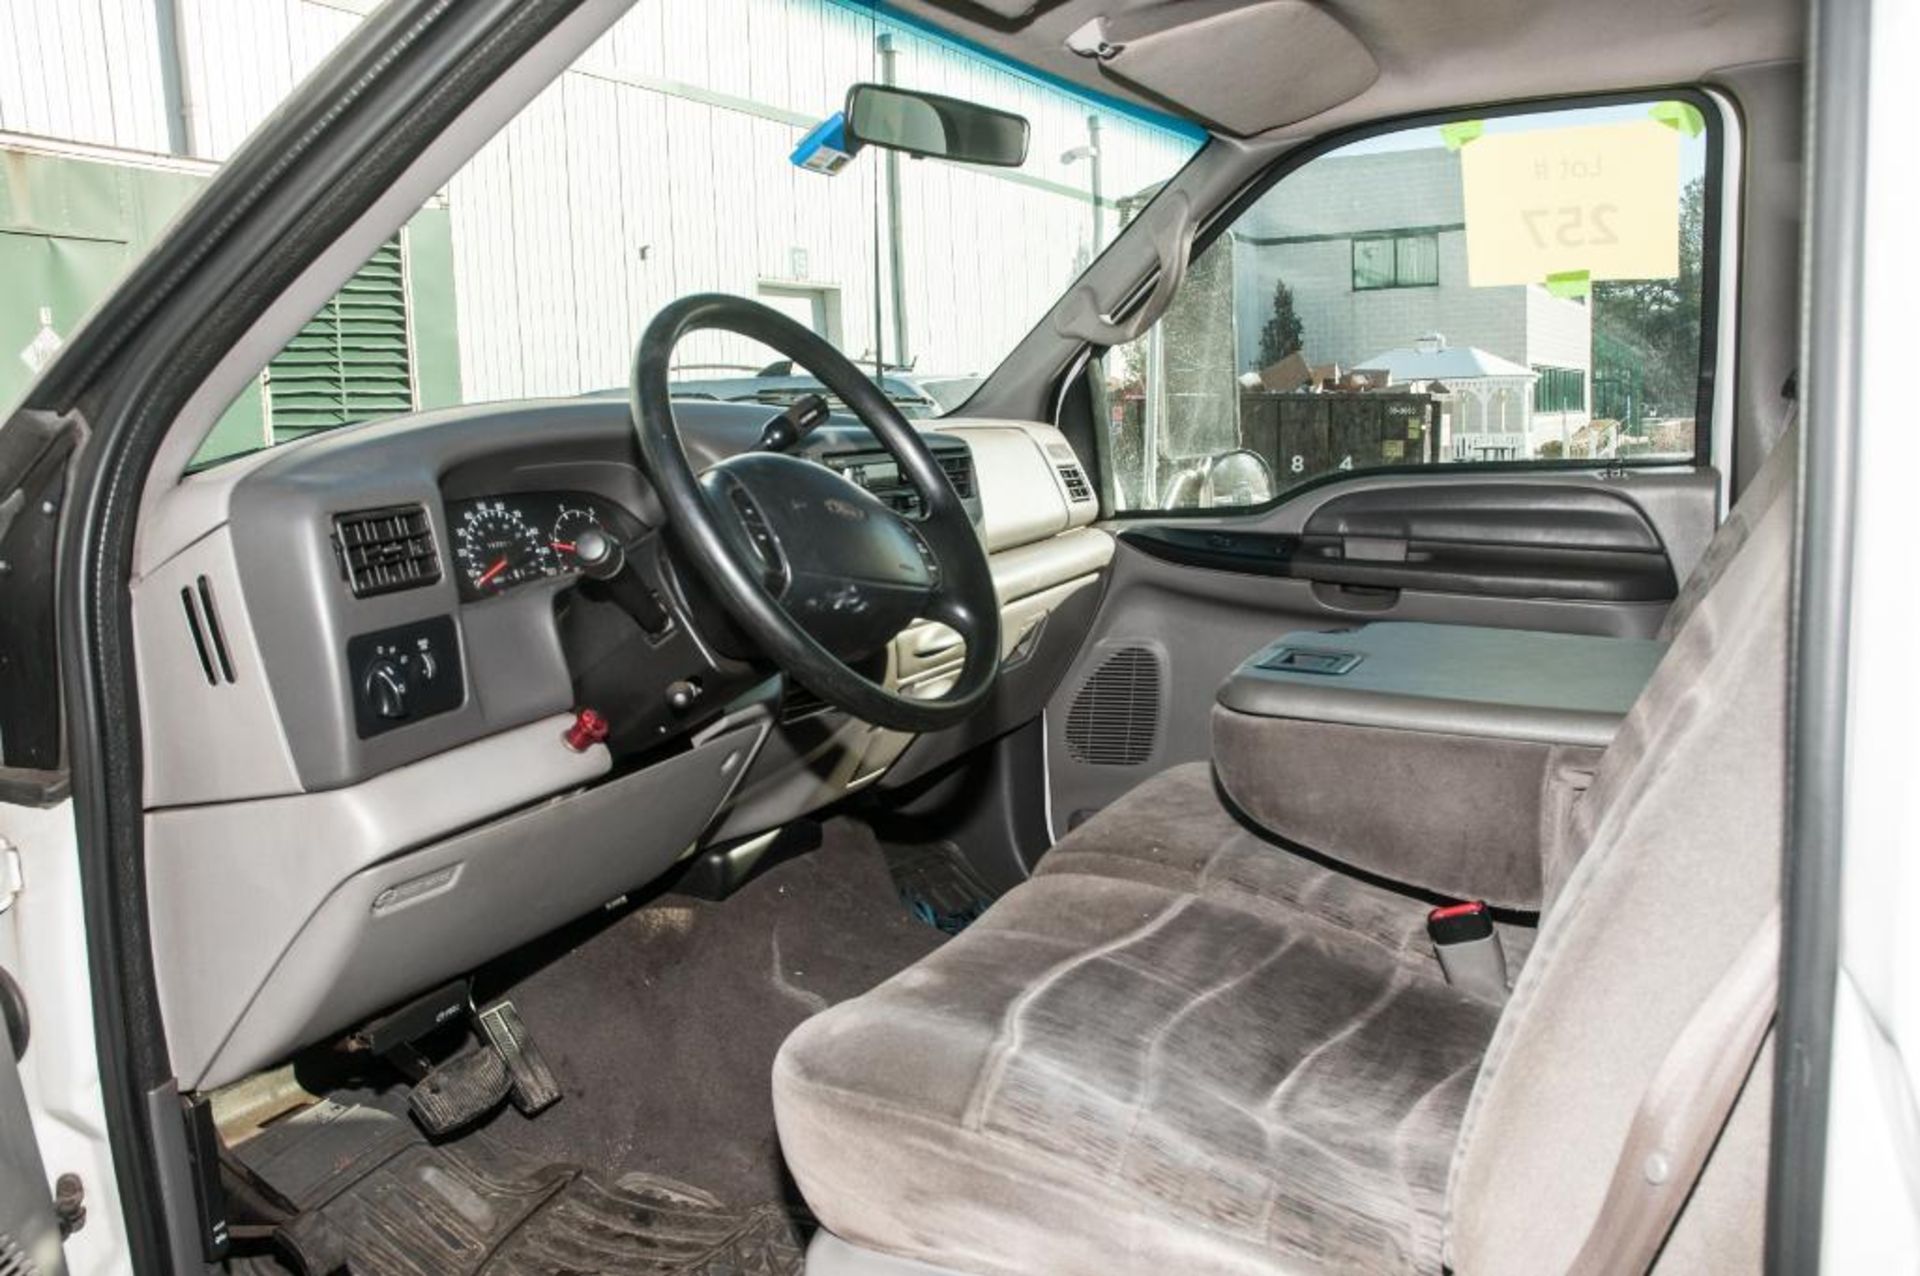 Ford F450XLT 14' S/A Stakebed Truck Vin: 1FDXF46F2XEE70331 (1999) V8 7.3L Diesel Engine, A/T, 14� Wo - Image 7 of 8